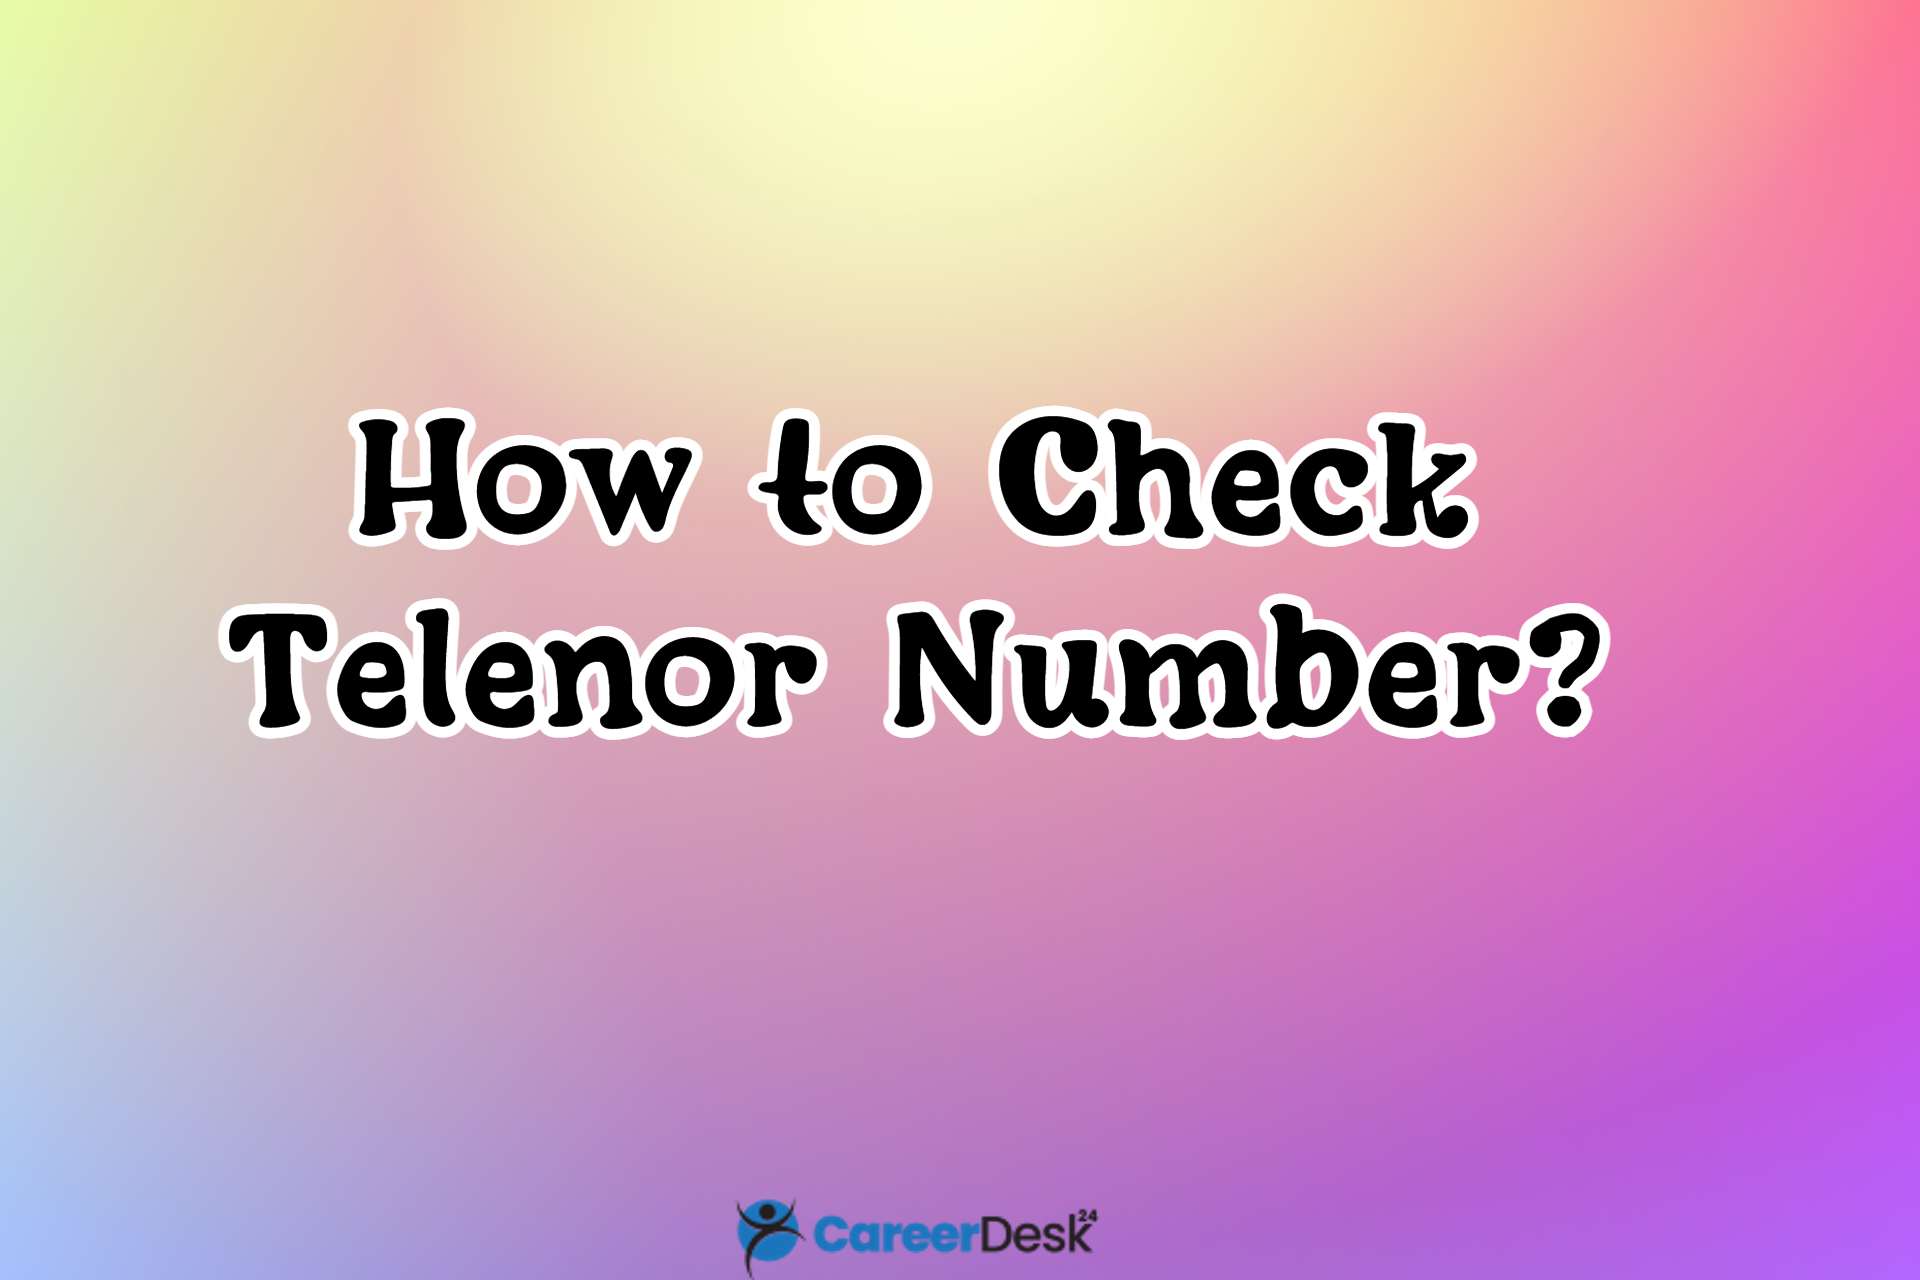 How to Check Telenor Number?